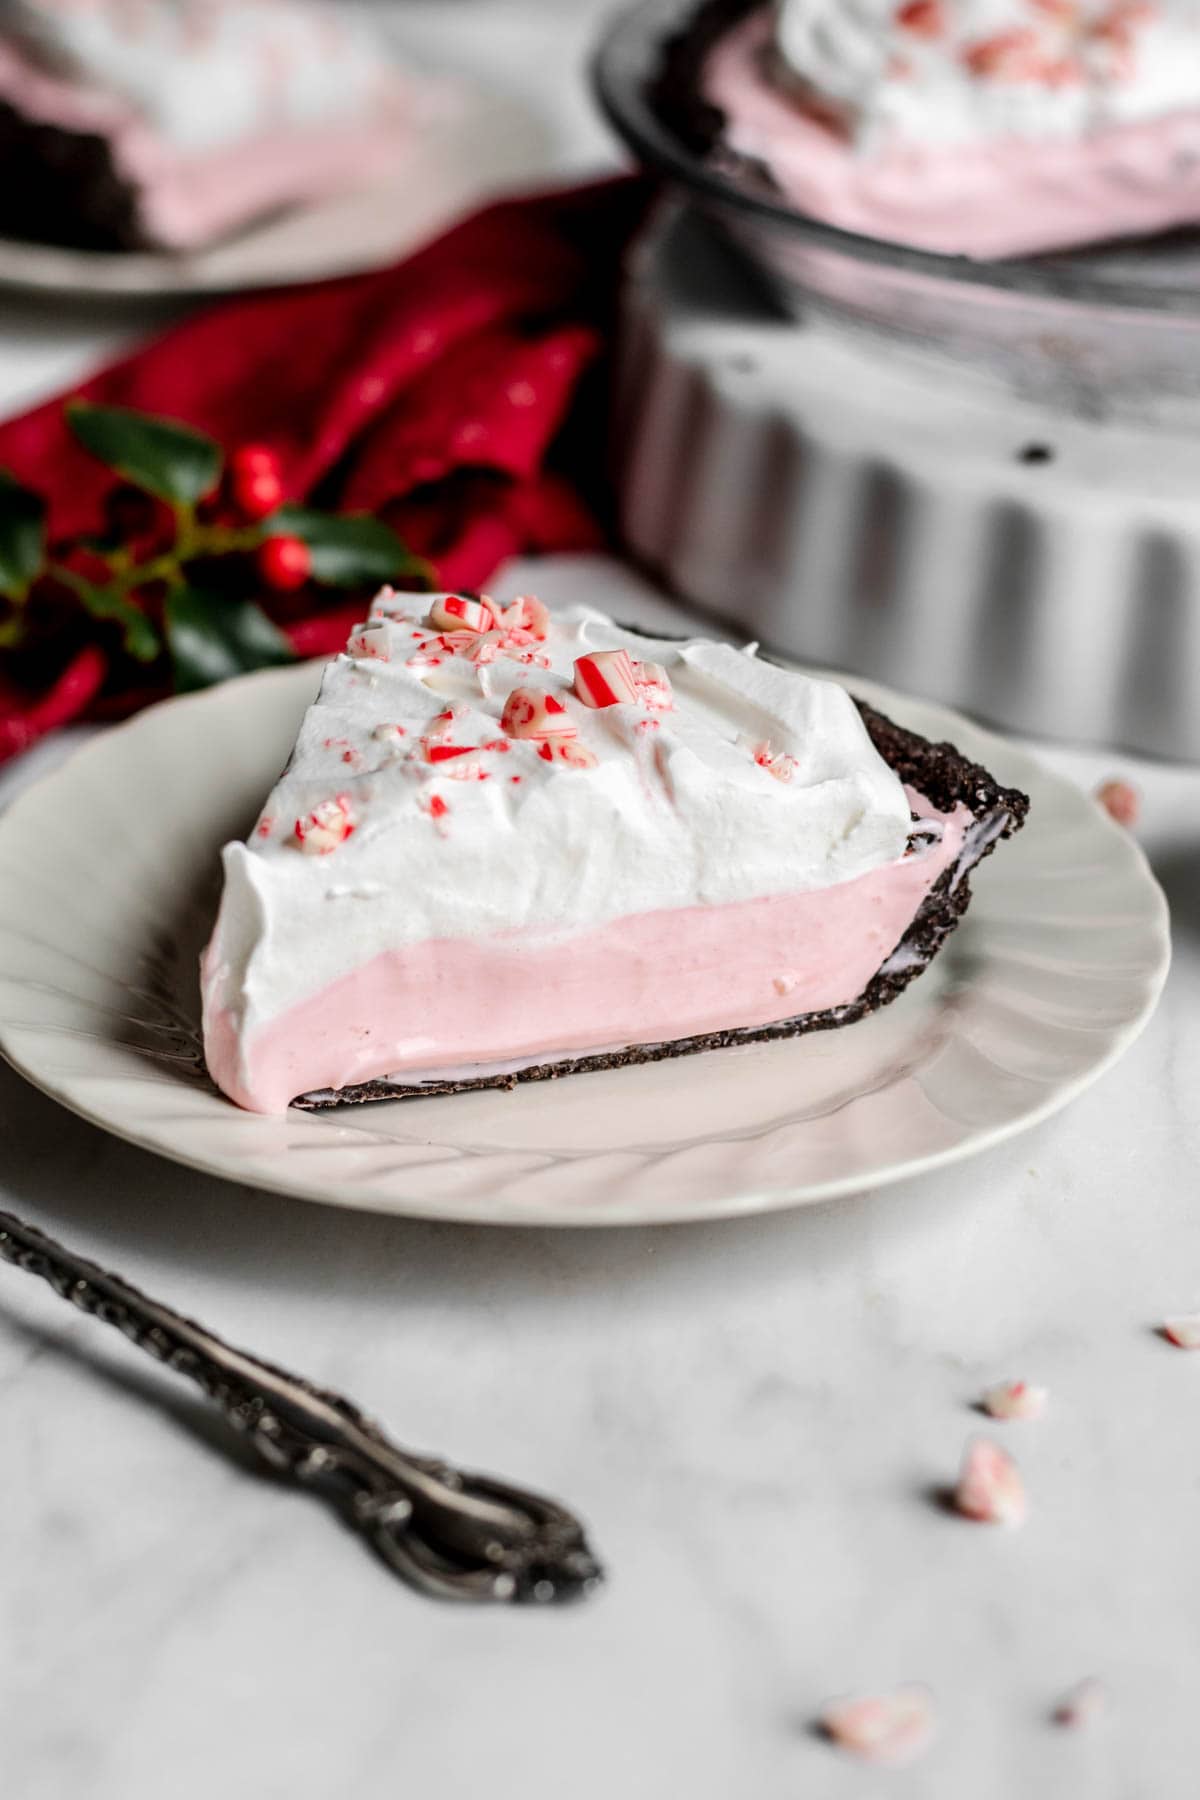 Candy Cane Pie slice on serving plate